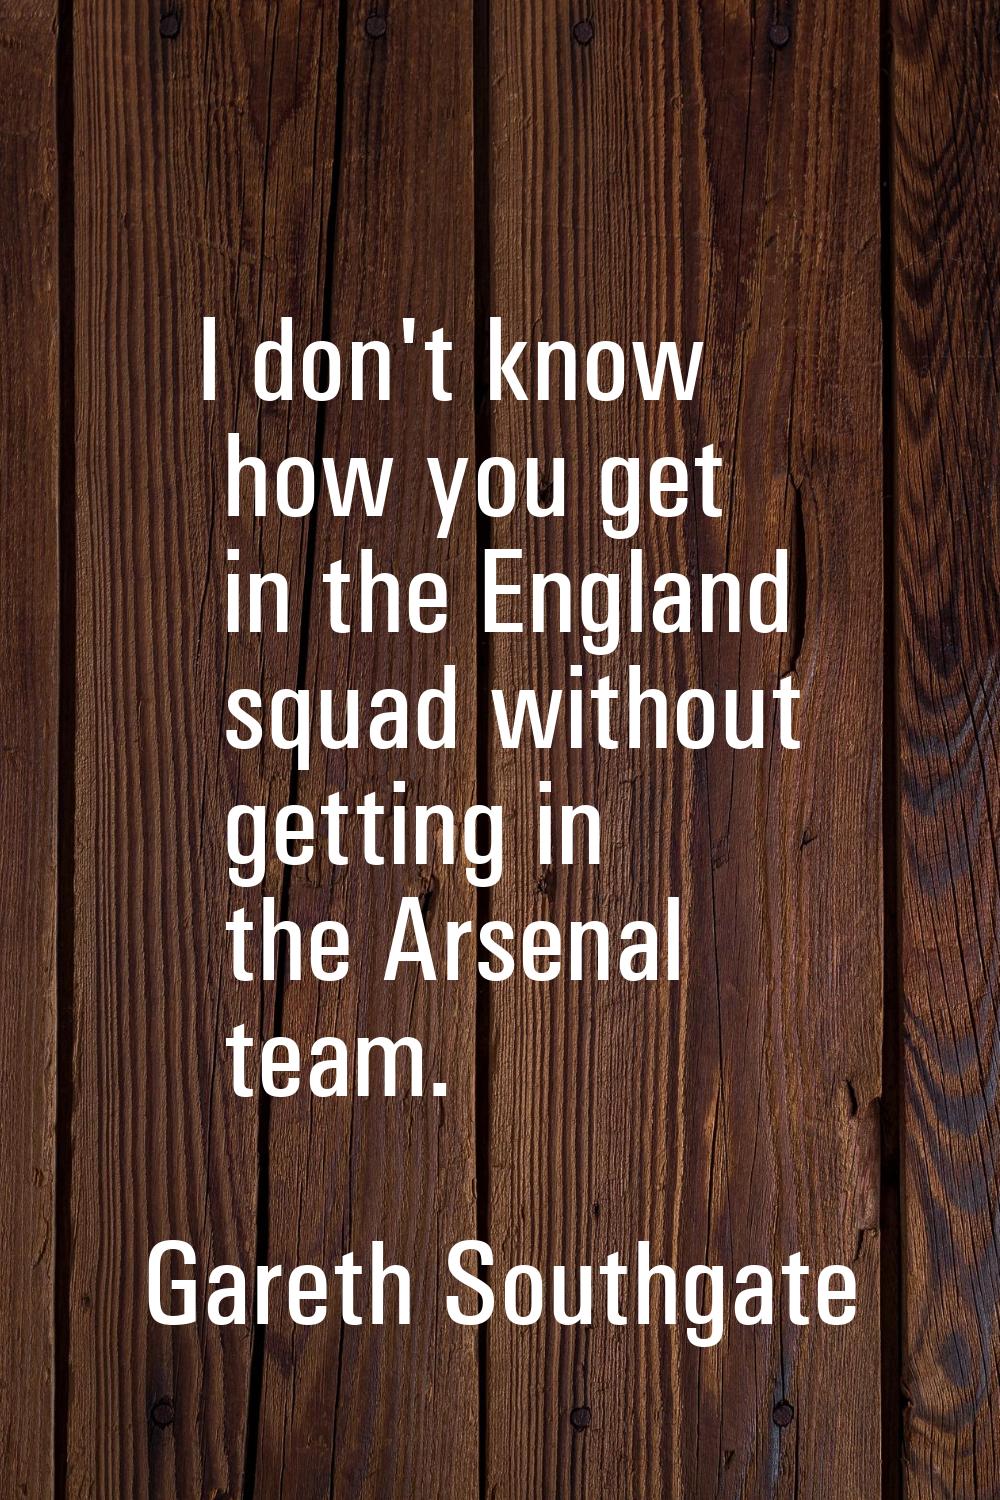 I don't know how you get in the England squad without getting in the Arsenal team.